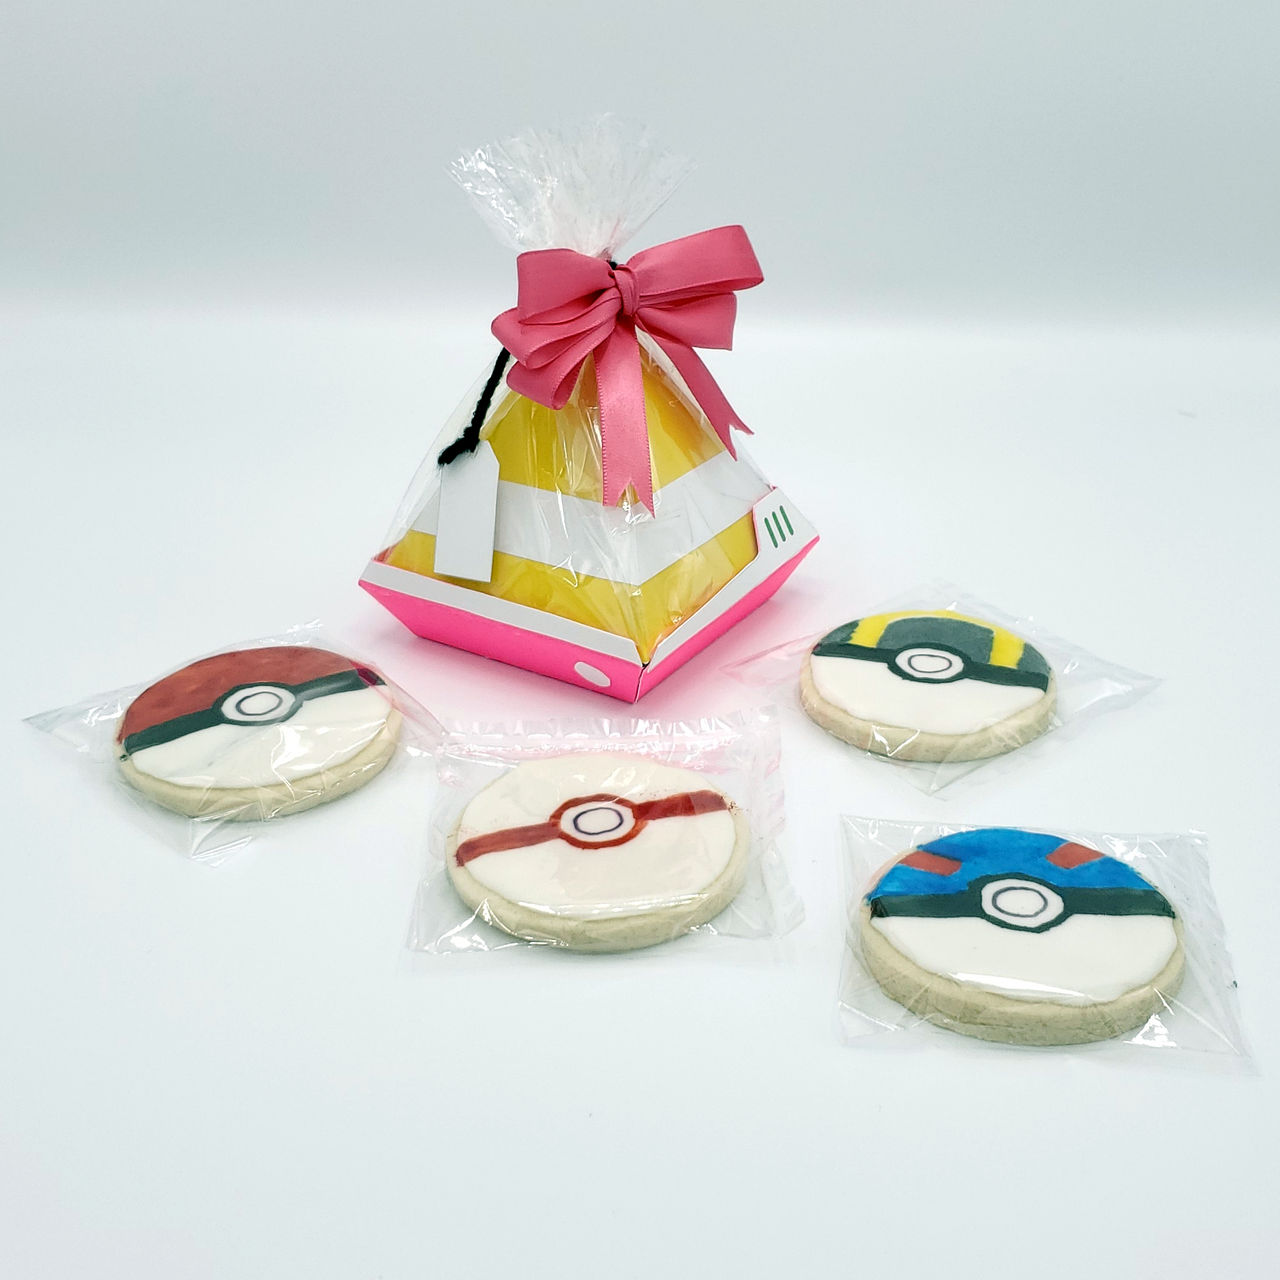 Pokemon Go Gift Box With Pokeball Sugar Cookies By Seancantrell On Deviantart